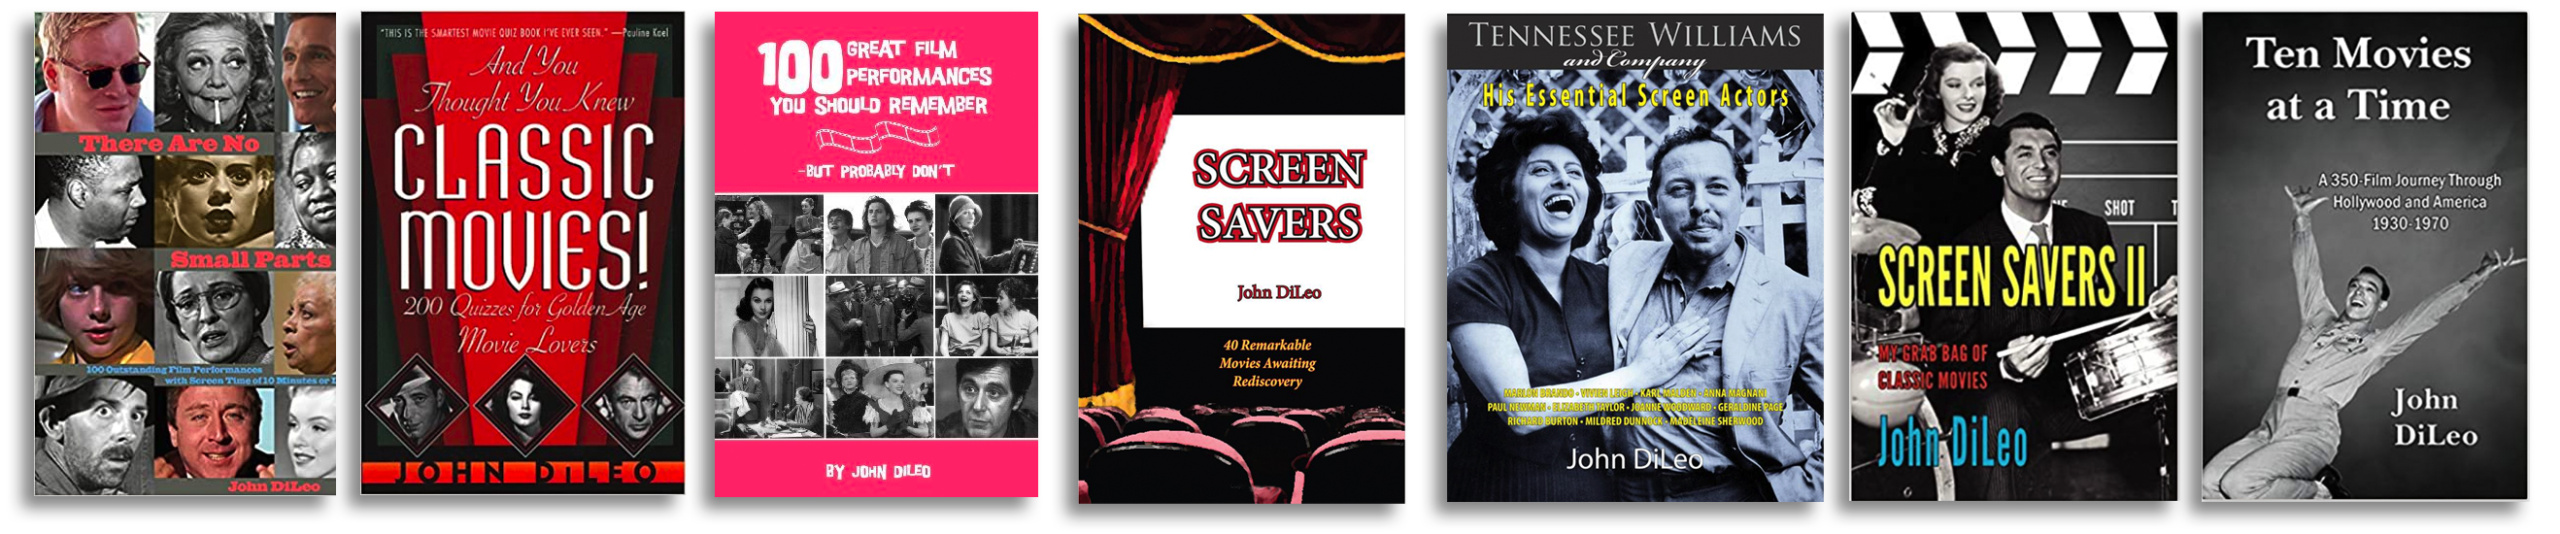 John DiLeo Books about Movies